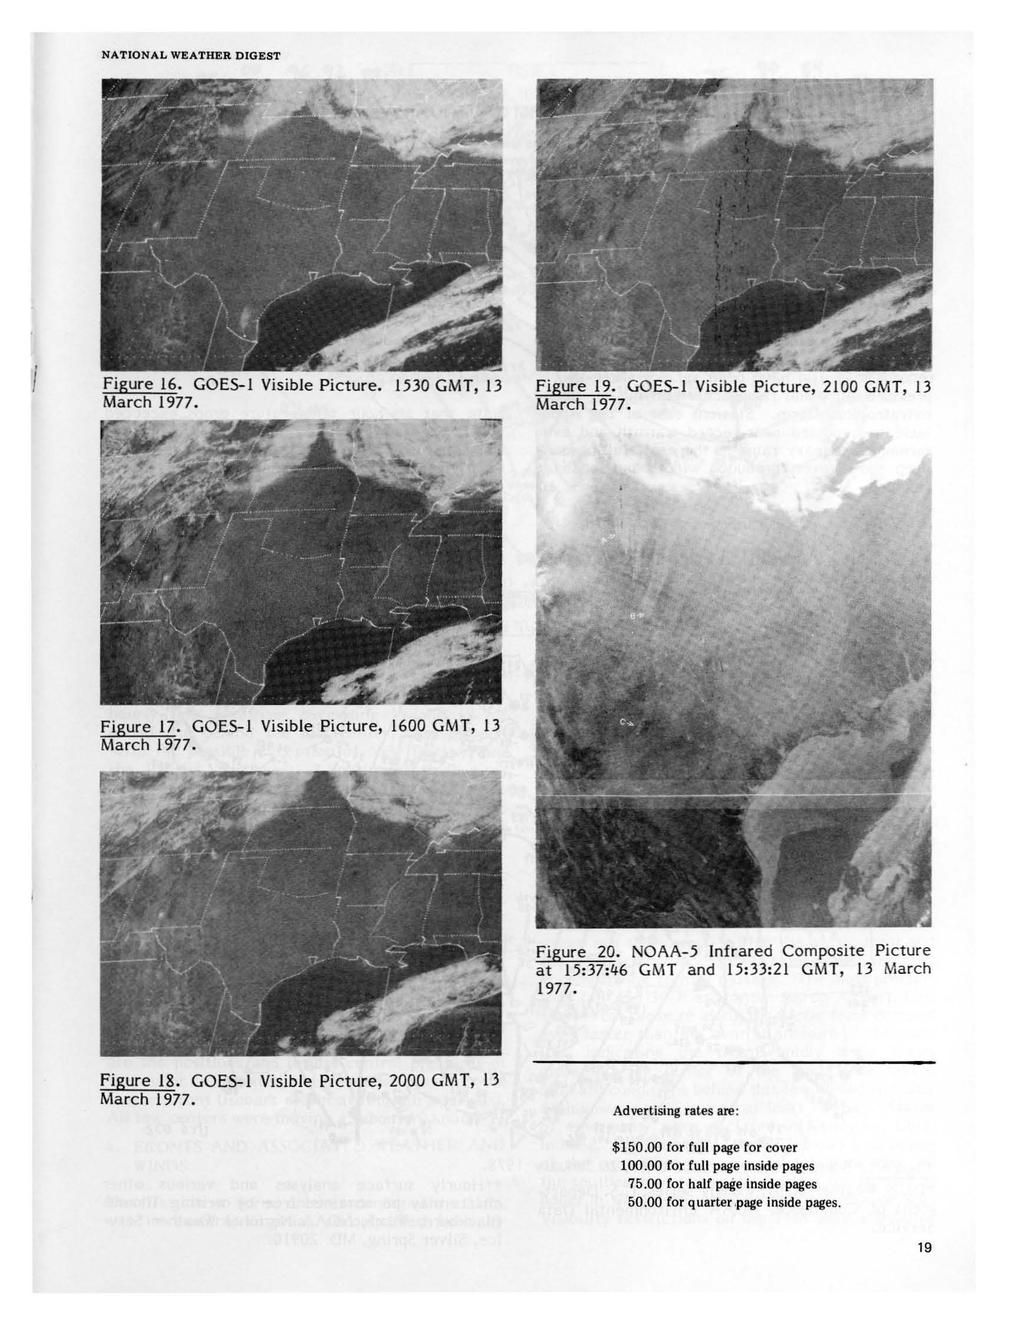 Figure 16. GOE5-1 Visible Picture. 1530 GMT, 13 March Figure 19. GOES-I Visible Picture, 2100 GMT, 13 March Figure 17. GOES-l Visible Picture, 1600 GMT, 13 March Figure 20.